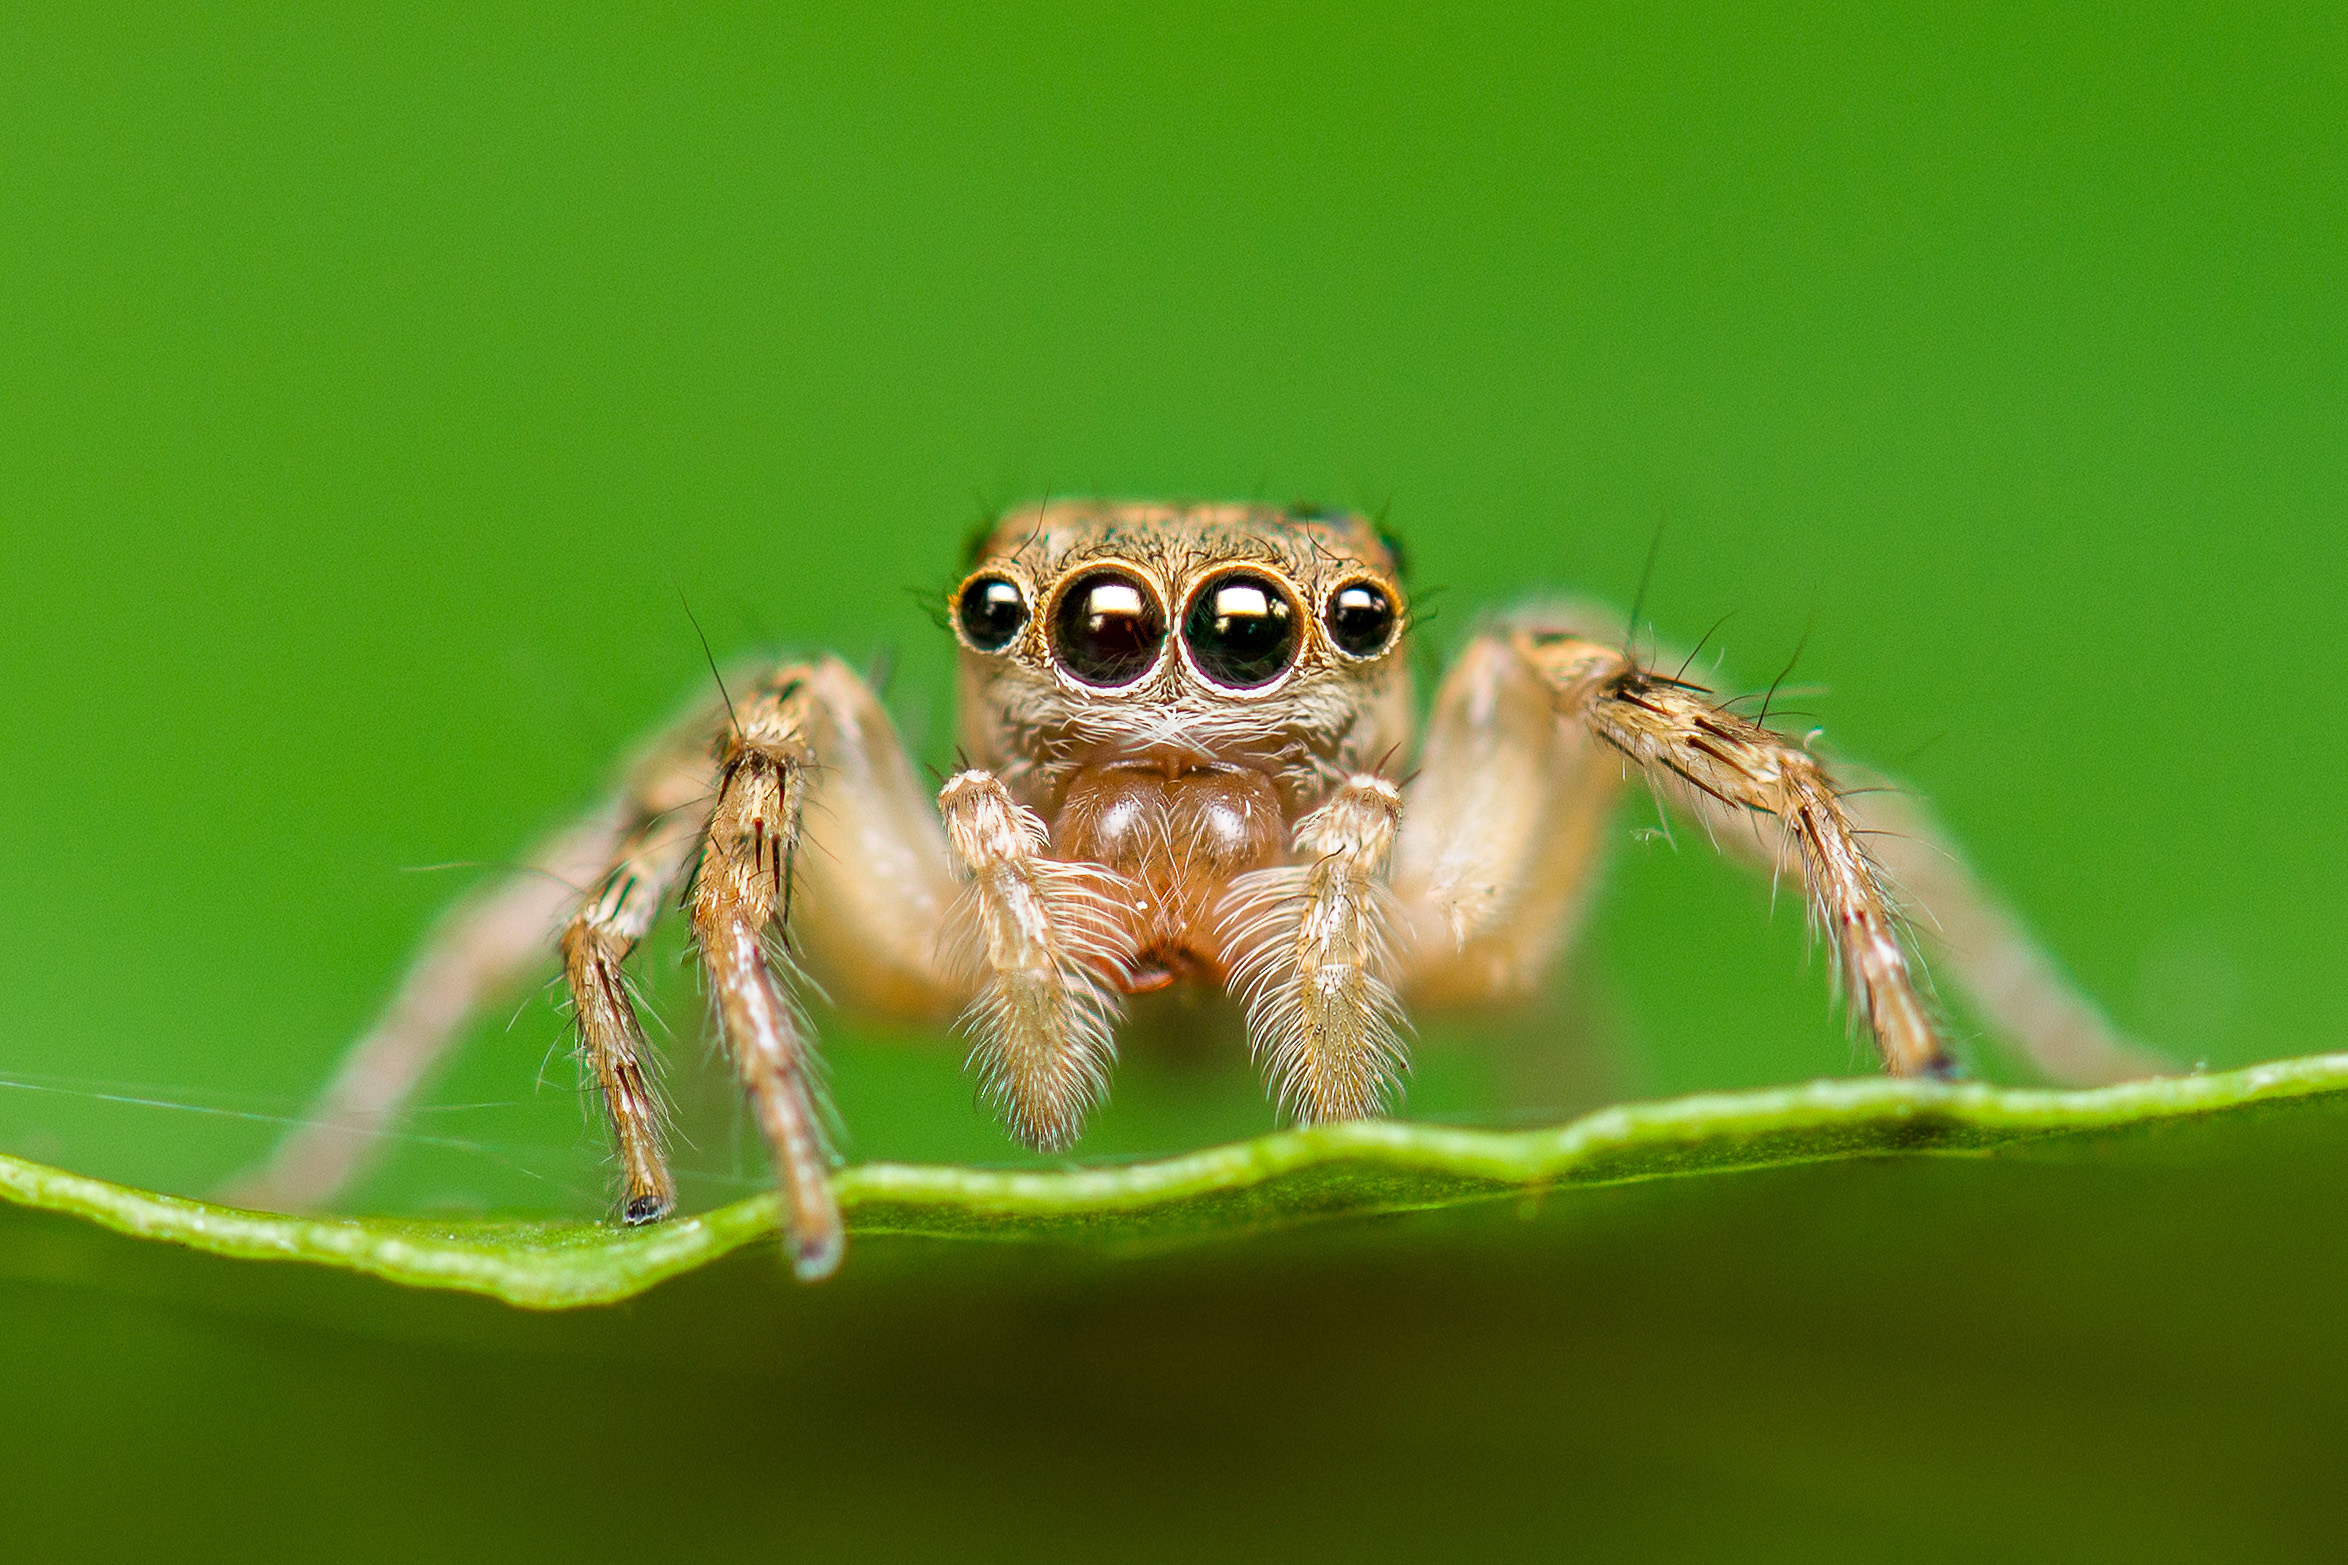 Close up of a jumping spider on a leaf